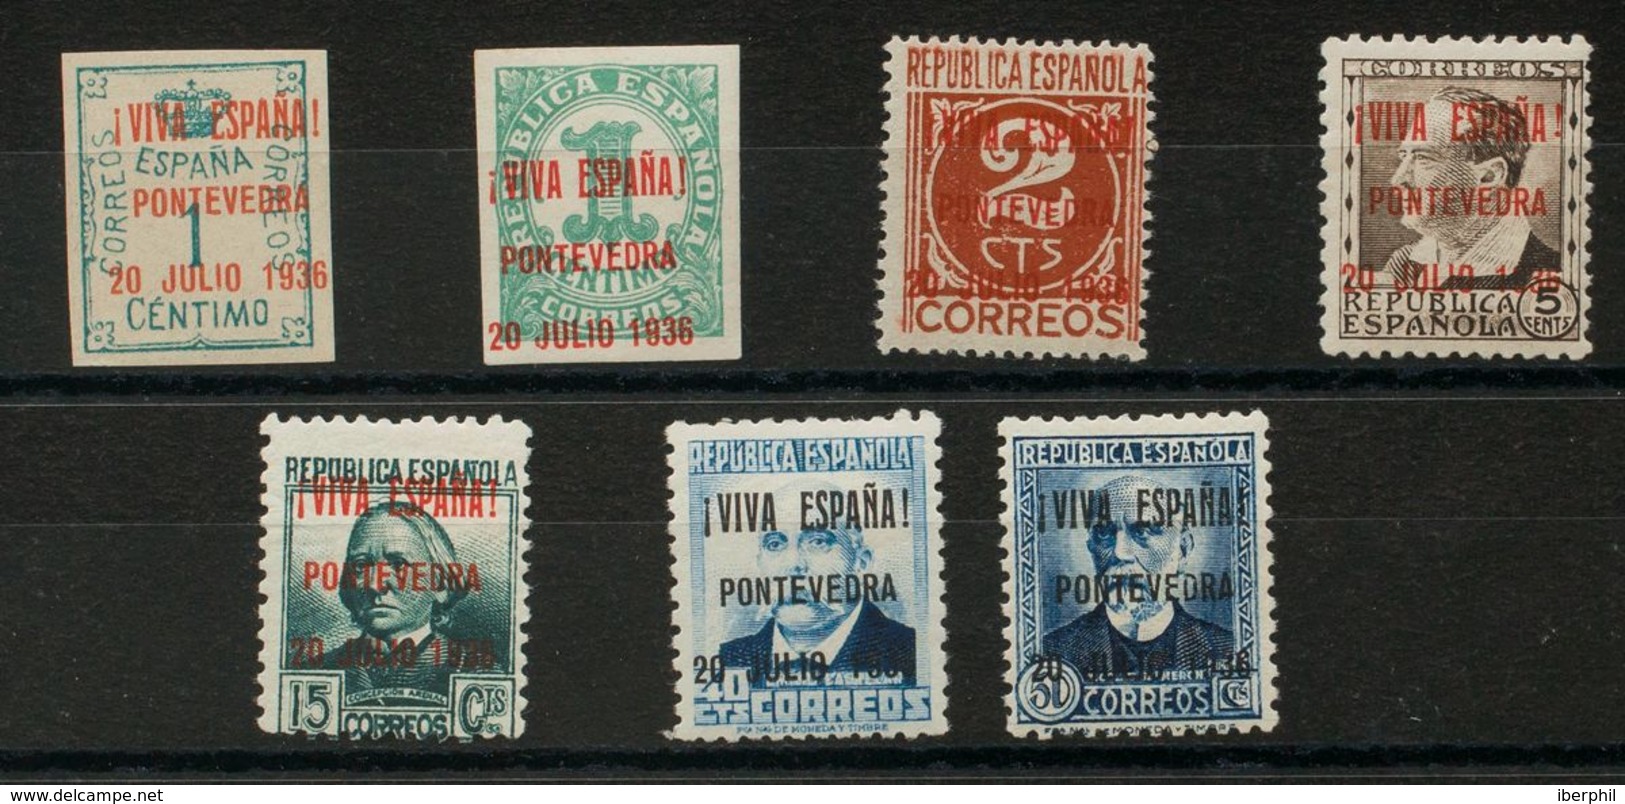 *1/2hcc,5hcc,6hcc,8hcc,13/14hcc. 1936. 1 Cts Verde, 1 Cts Verde, 2 Cts Castaño, 5 Cts Castaño Negro, 15 Cts Verde Gris,  - Nationalist Issues